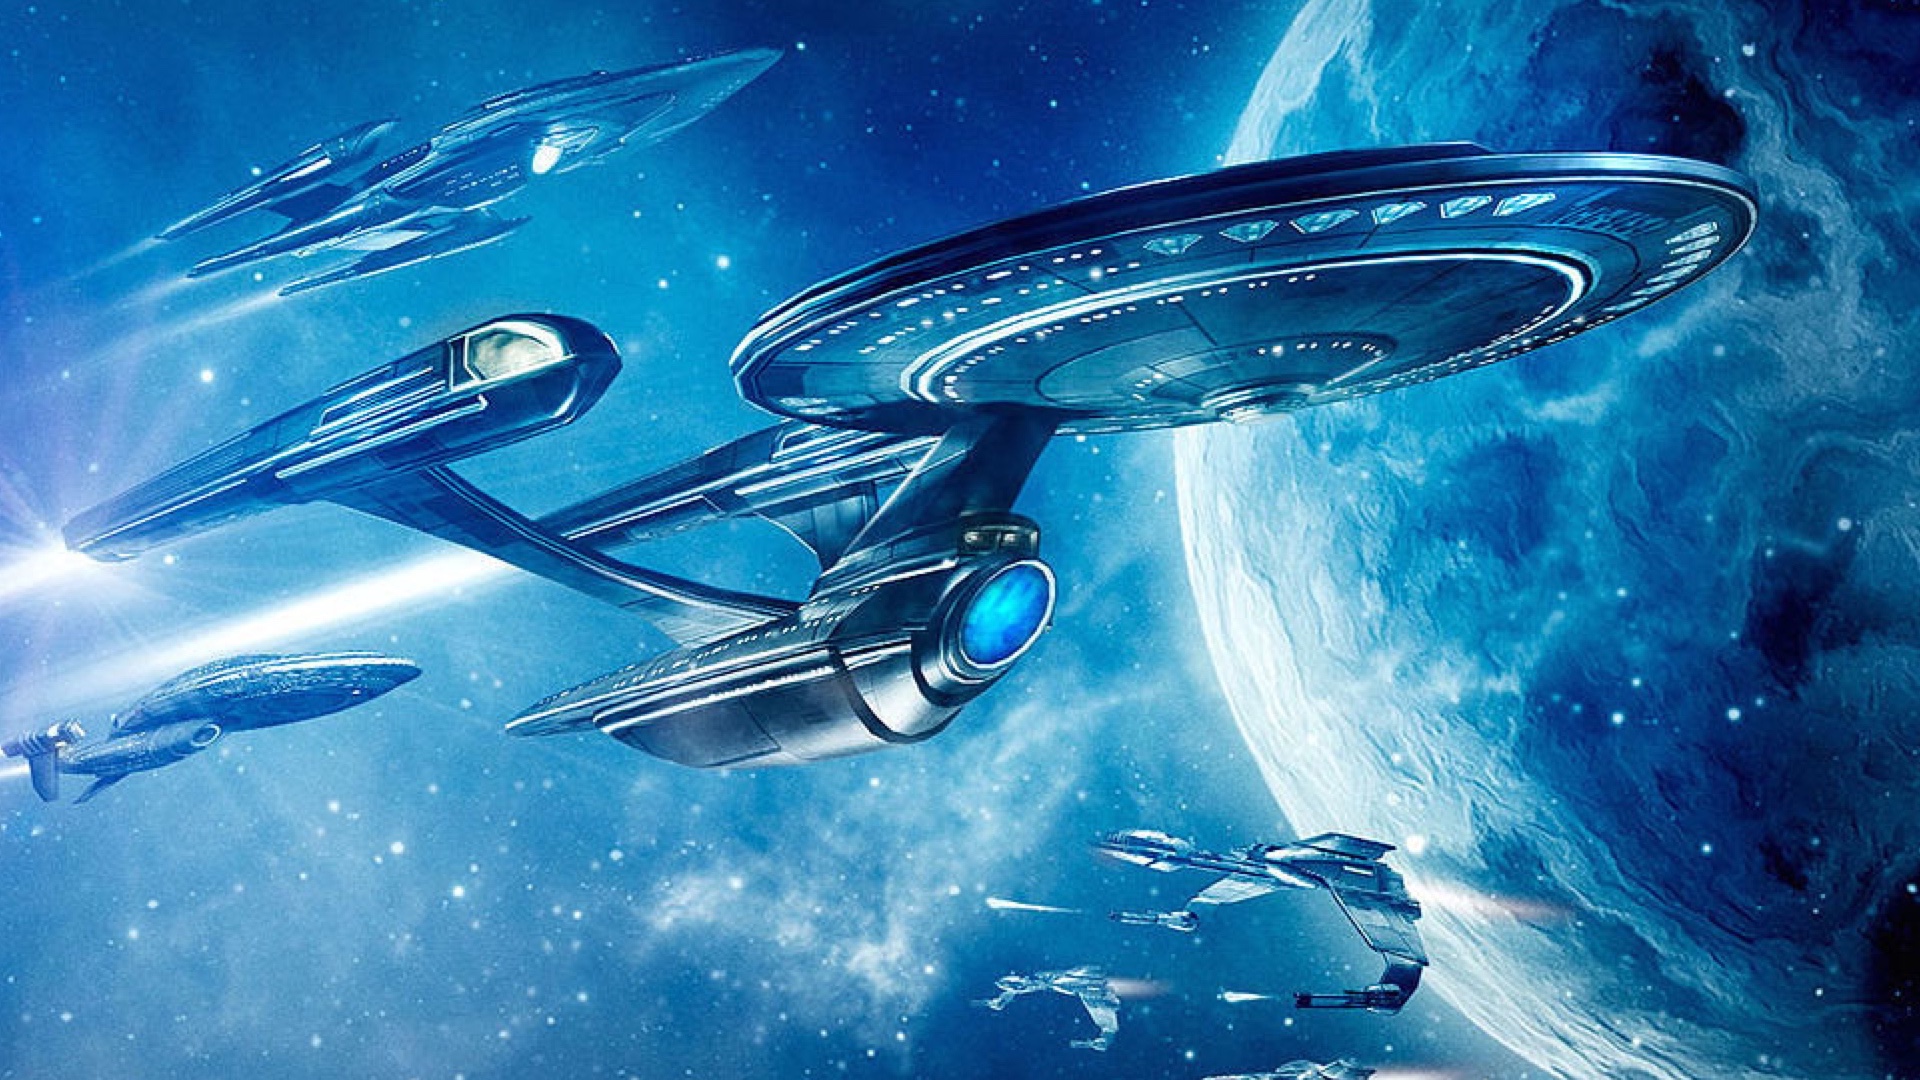 STAR TREK 4 Will Reportedly Feature a New Female Hero and Female Villain and Will Start Production in 2019